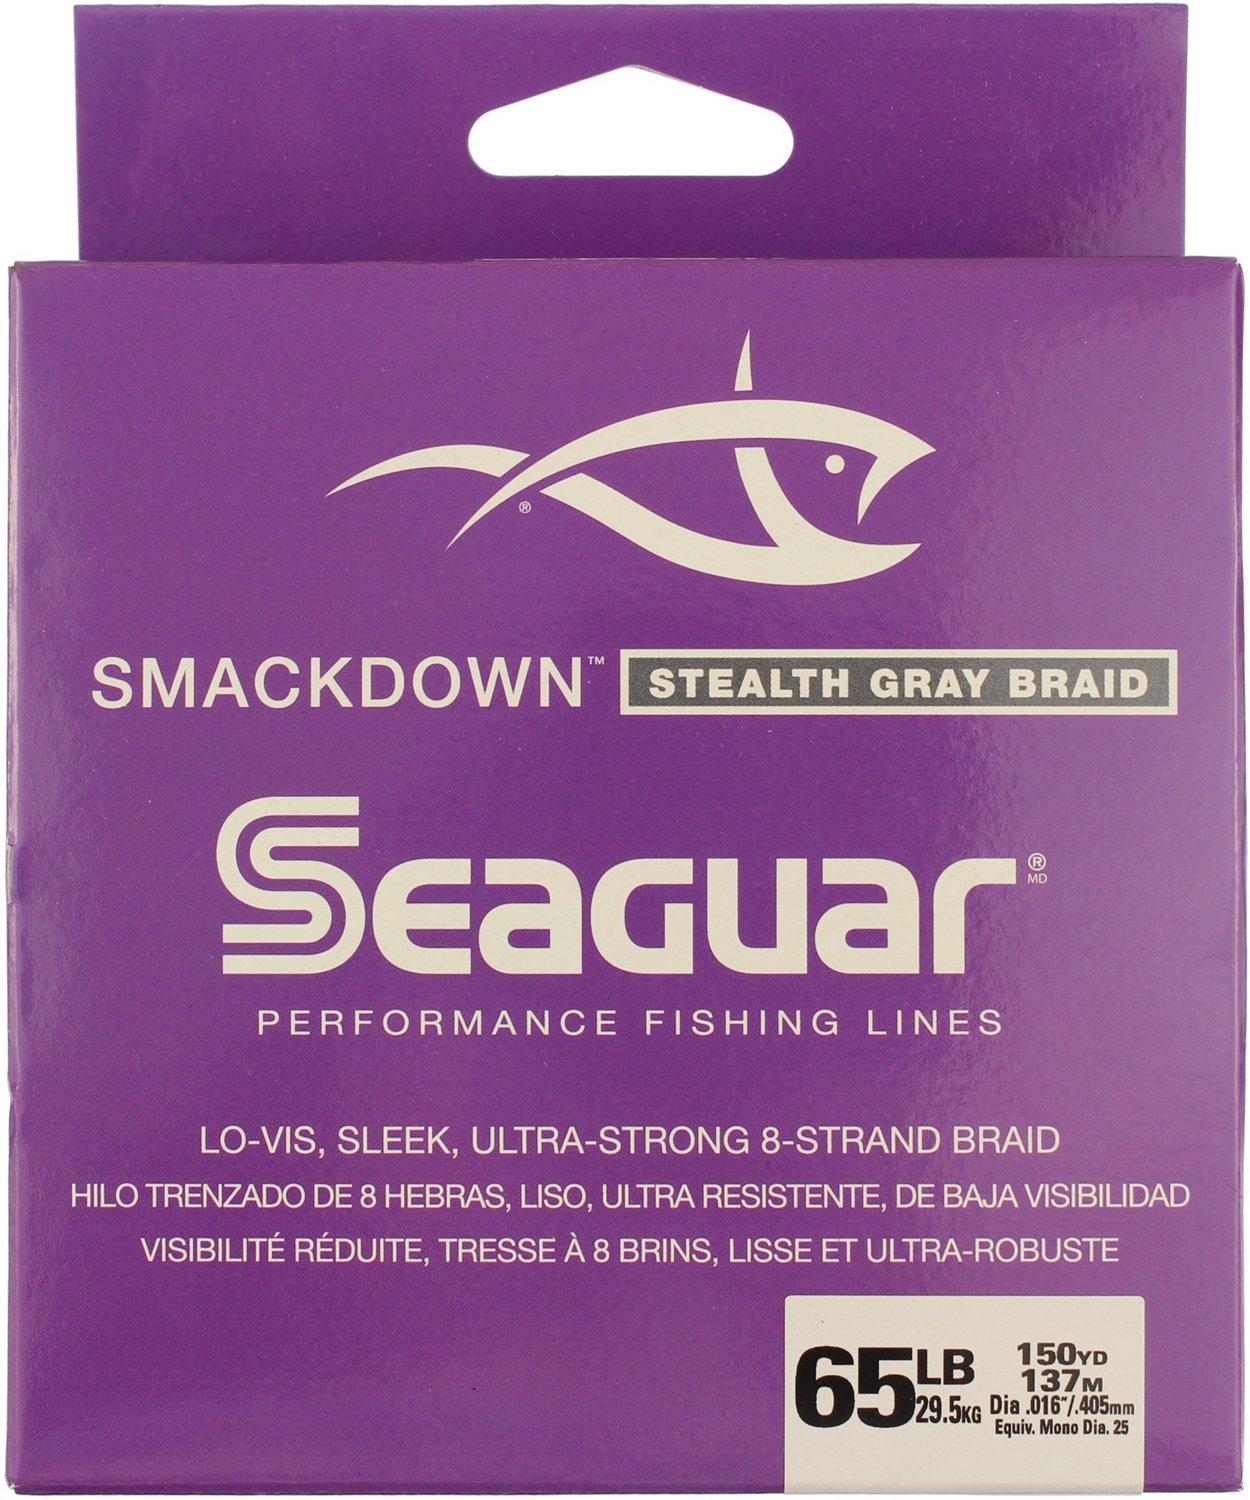 Academy Sports + Outdoors Seaguar Smackdown 10 lb - 150 yd Braided Fishing  Line